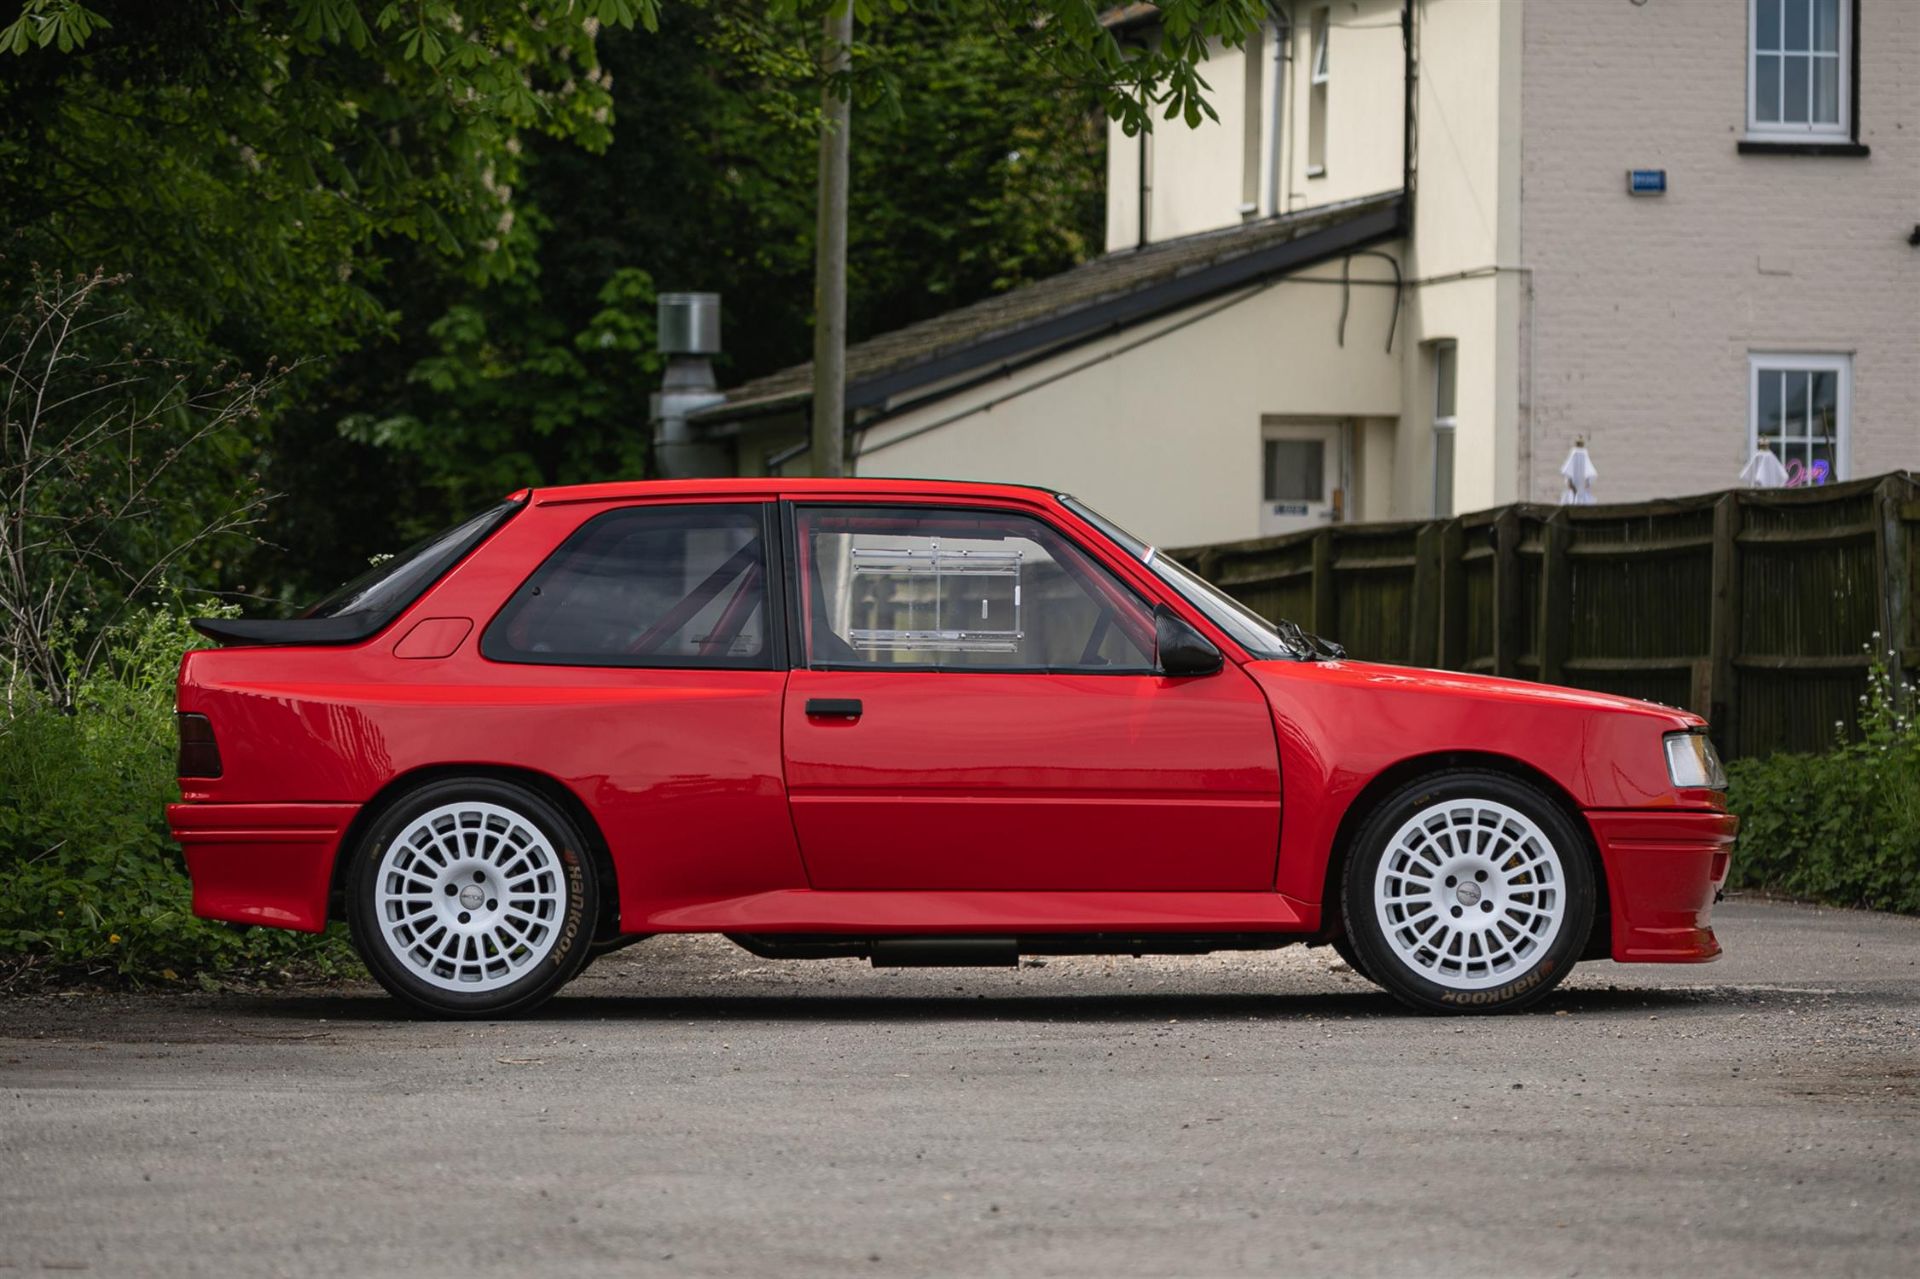 1988 Peugeot 309 GTi 16v Supercharged 'Maxi' Rally Special - Image 5 of 10